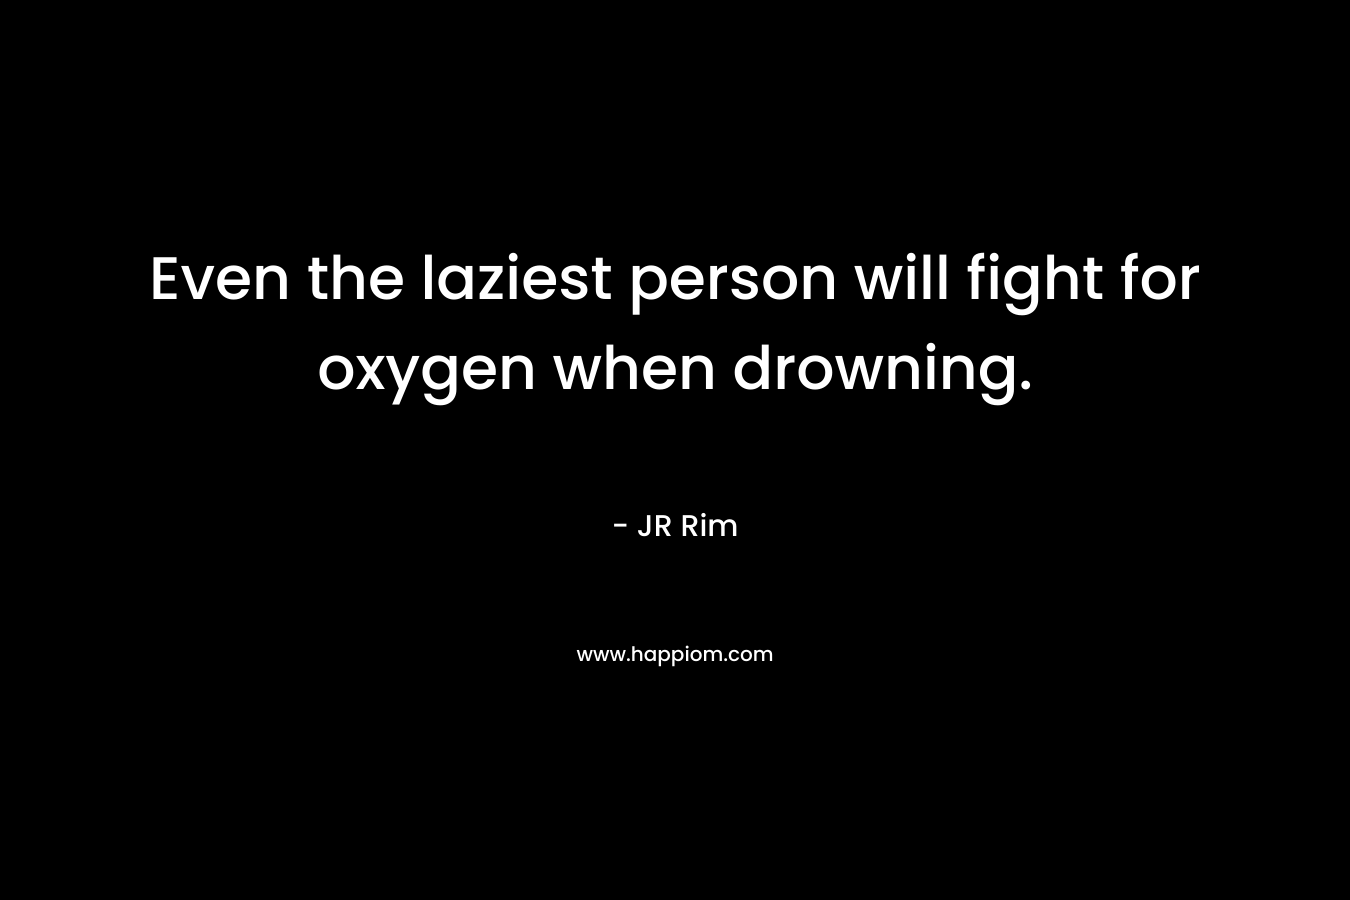 Even the laziest person will fight for oxygen when drowning. – JR Rim